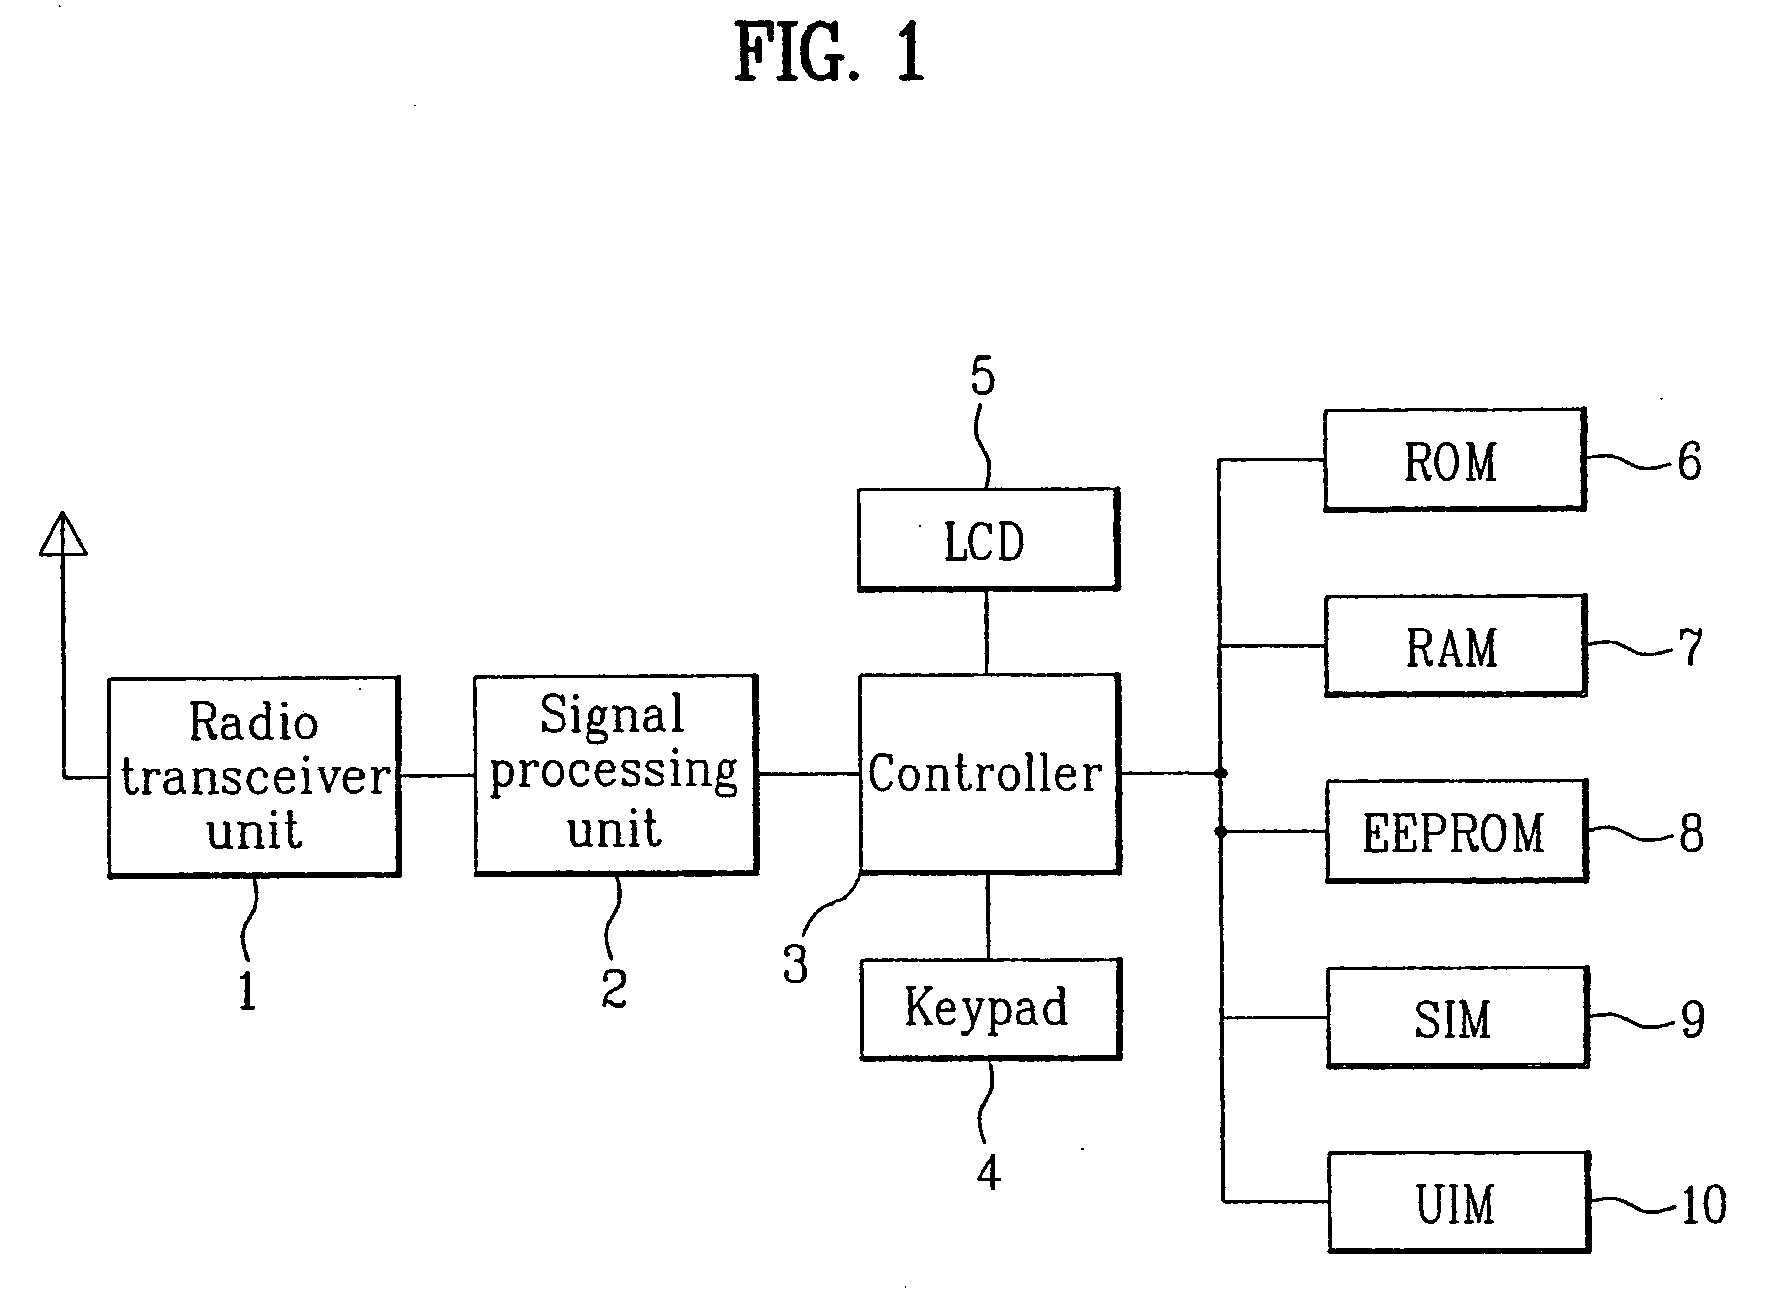 Method and apparatus for preventing hacking of subscriber identitification module in a mobile communication terminal